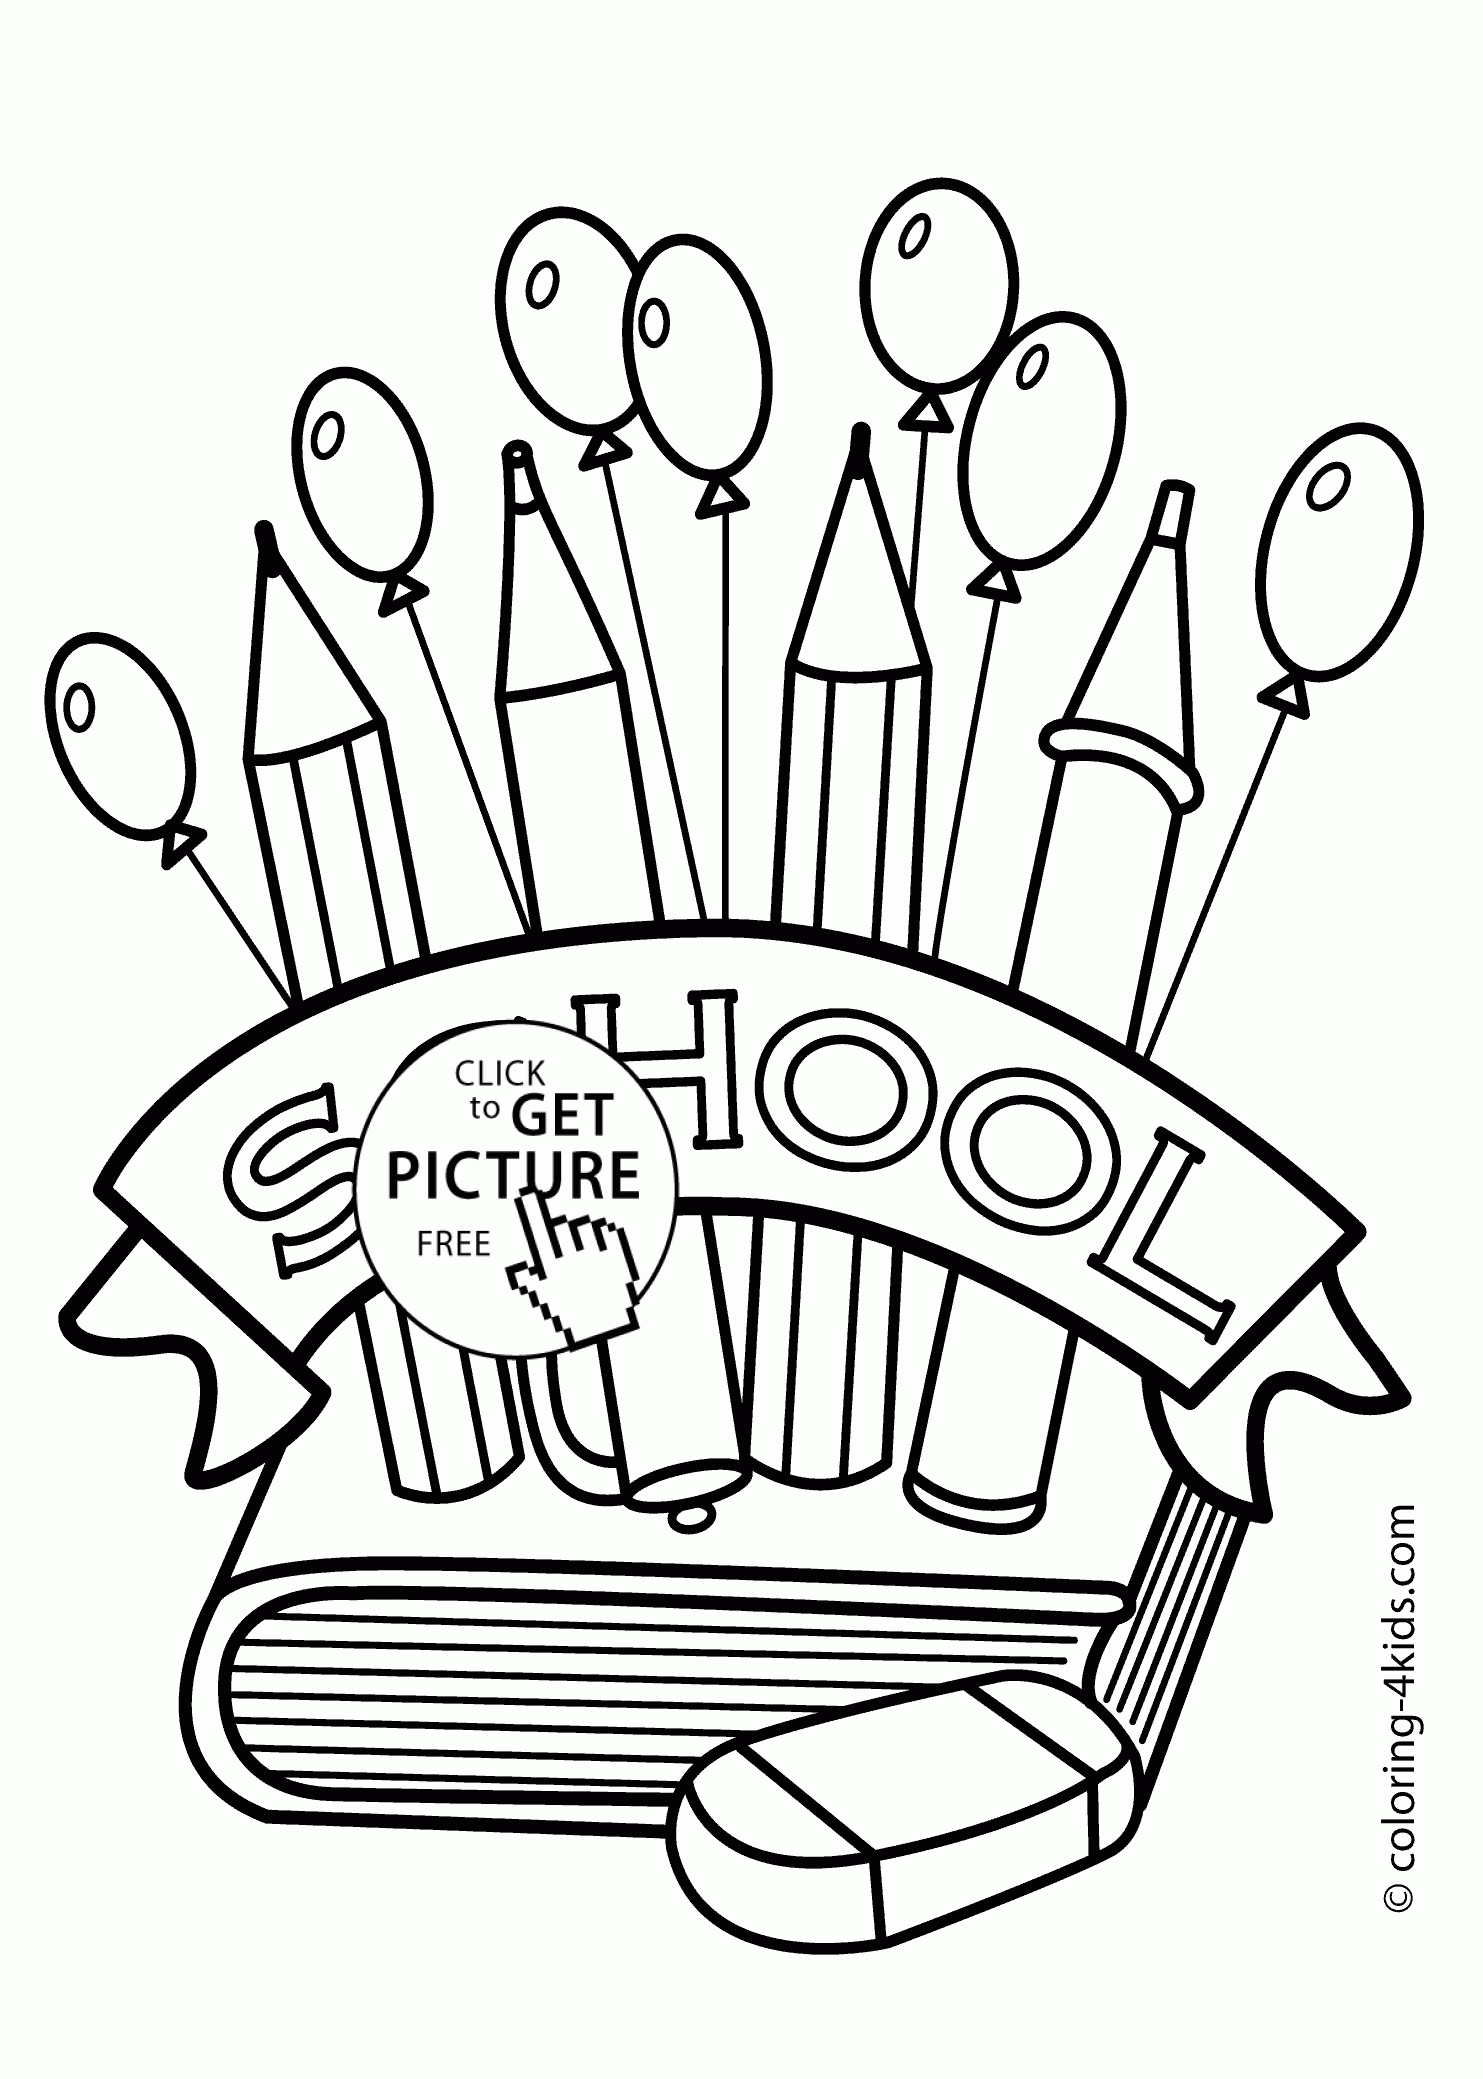 Coloring Pages : Coloring Pages For Kidse Back To The School Page - Back To School Free Printable Coloring Pages